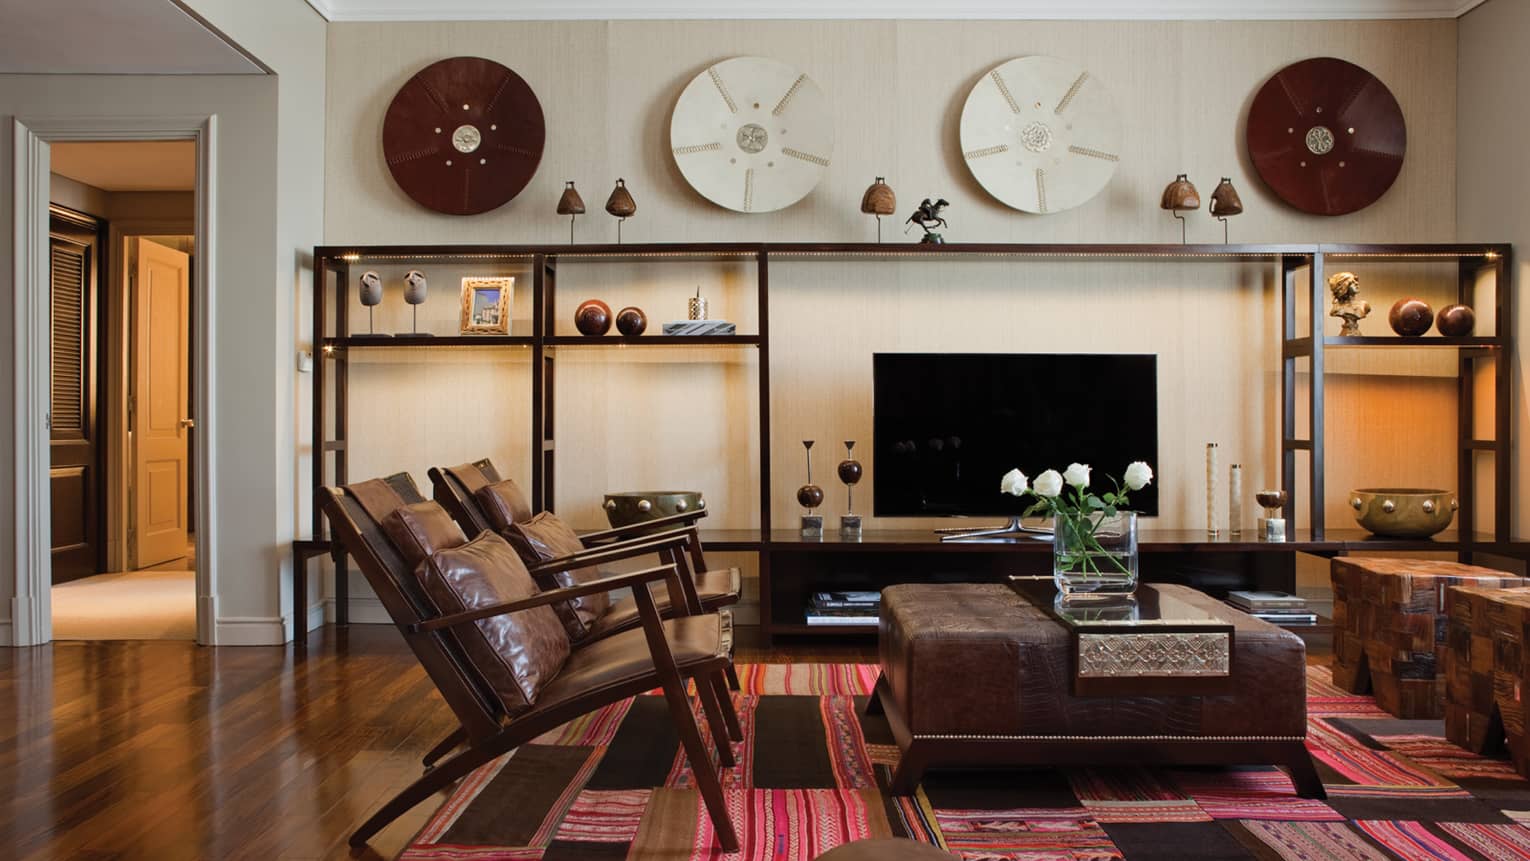 Modern brown leather armchairs and large ottoman with fresh flowers, modern and wood Argentine-inspired art